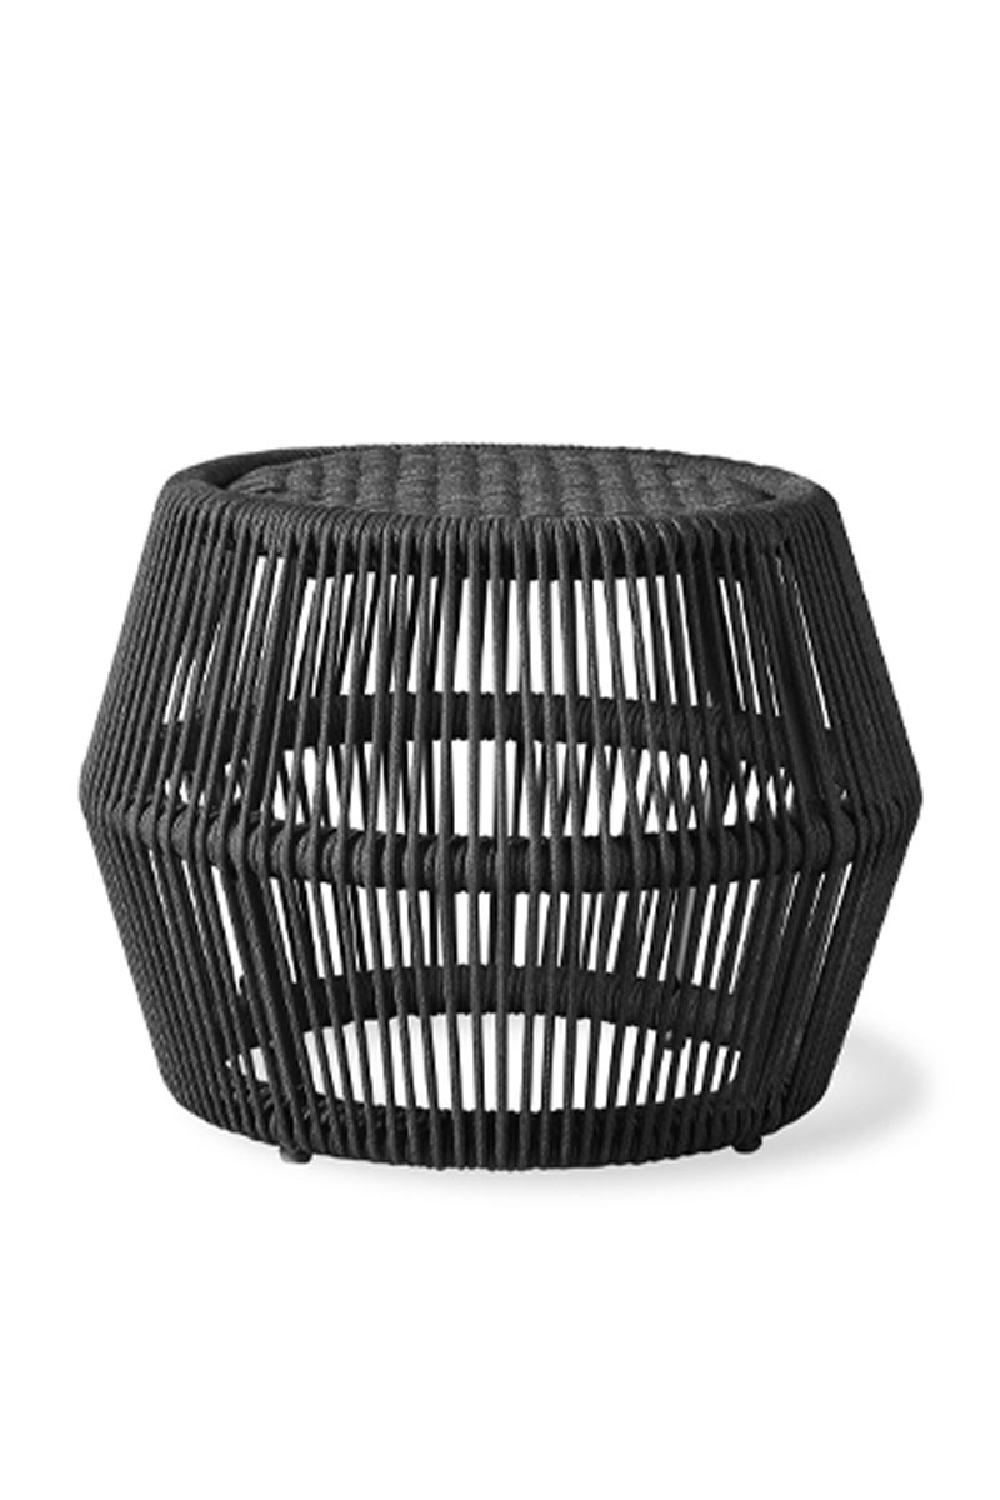 Geometrical Outdoor Side Table | Andrew Martin Voyage | OROA